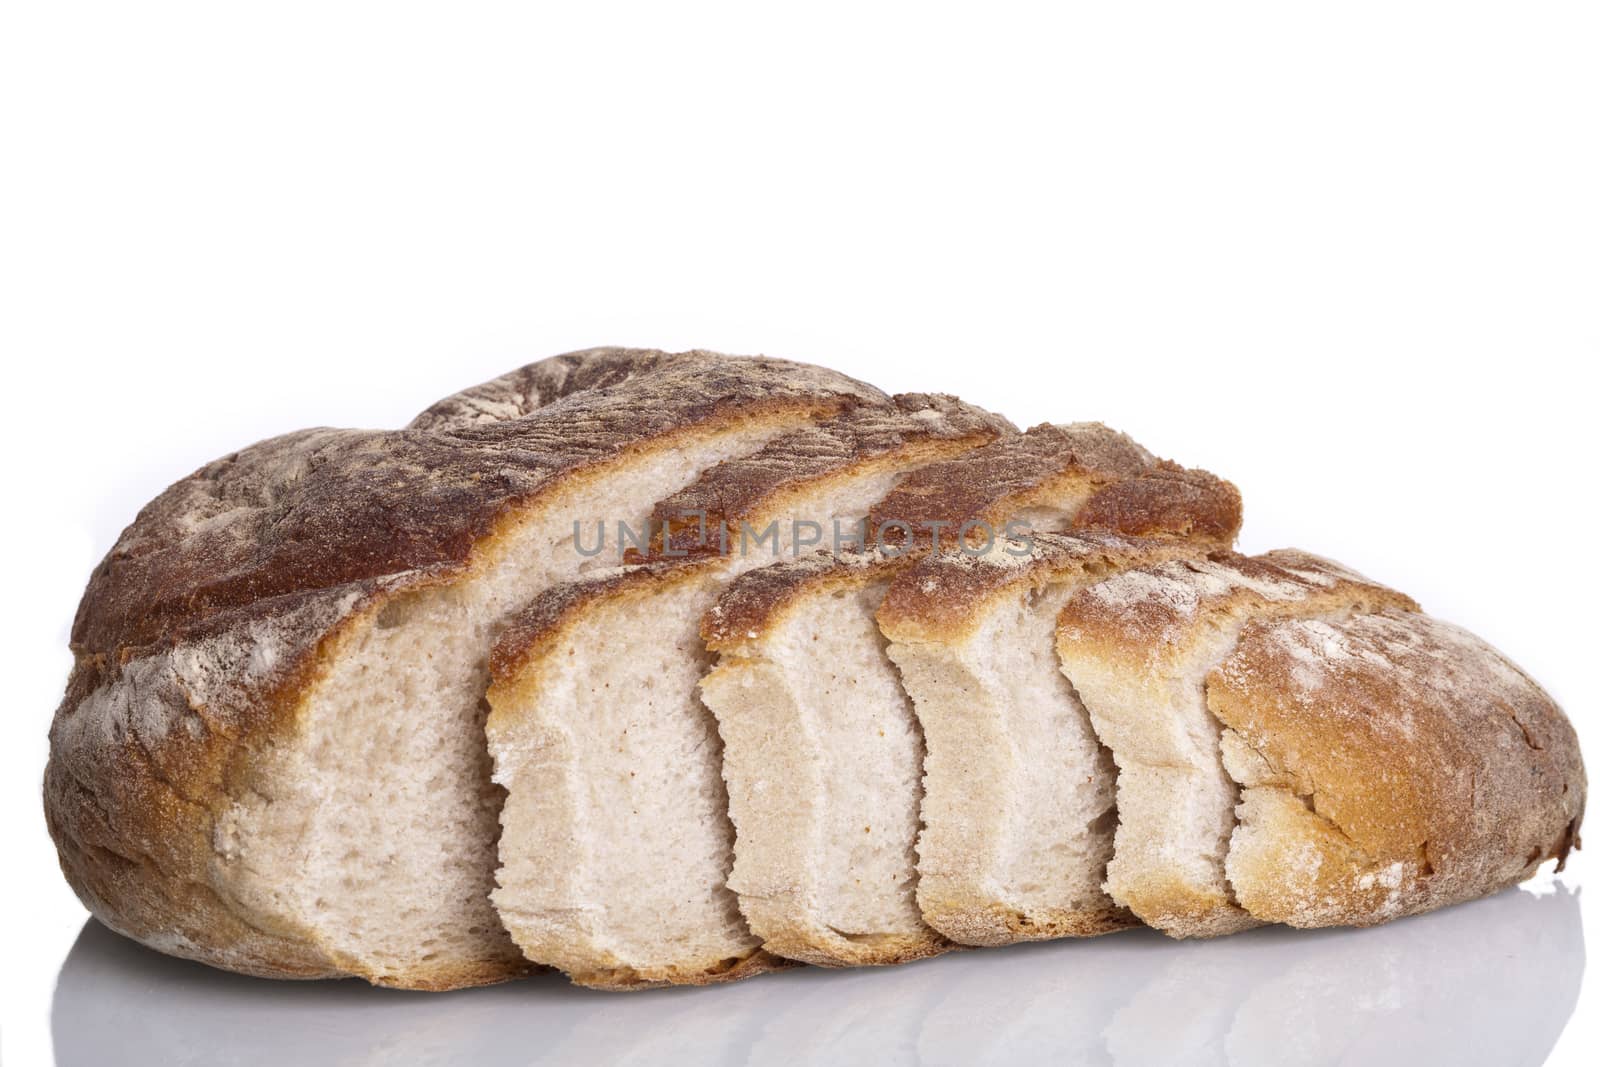 tasty fresh baked bread bun baguette natural food isolated on white background